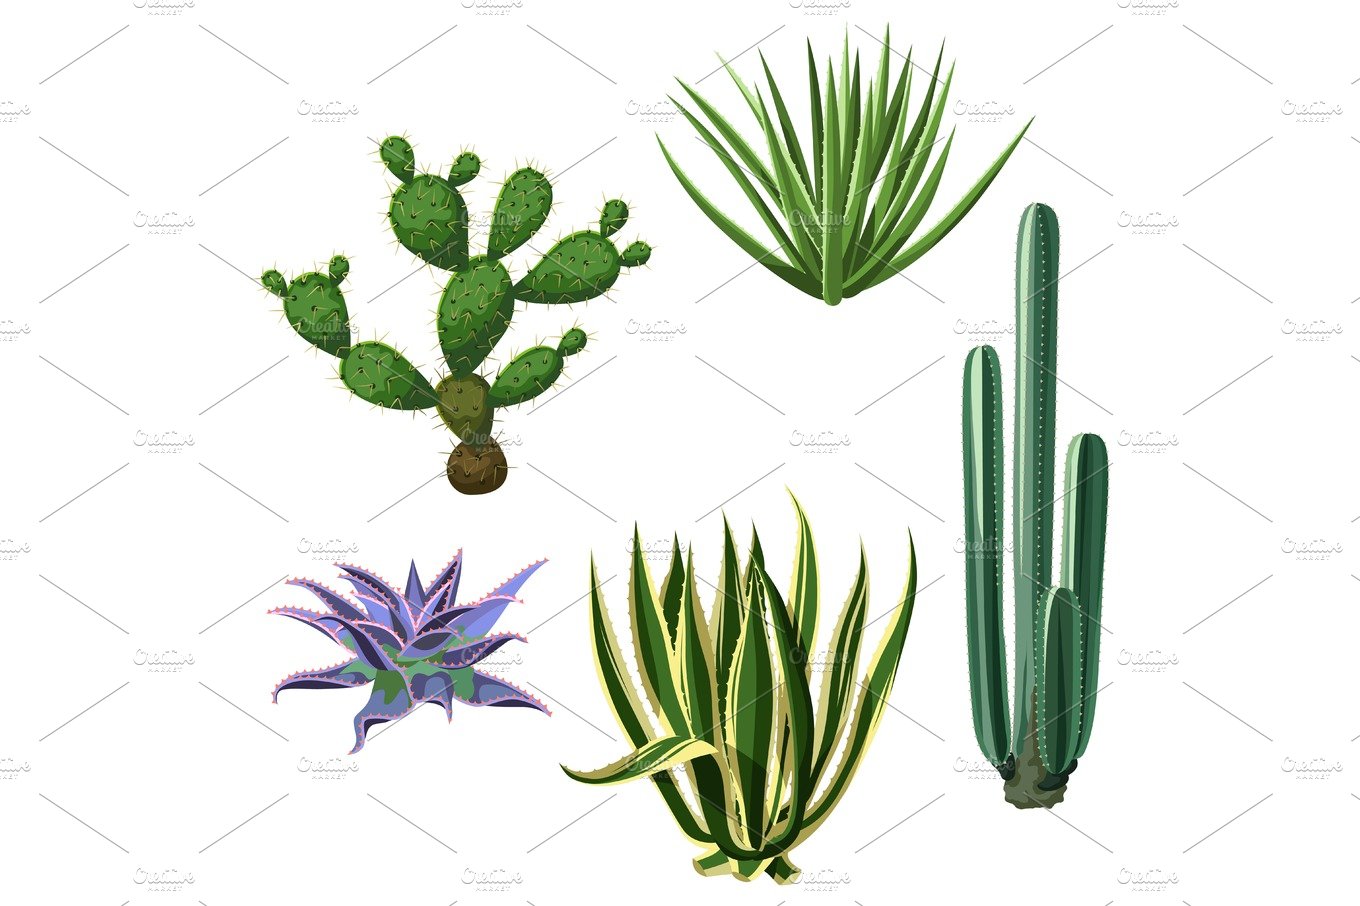 Group of different types of plants.